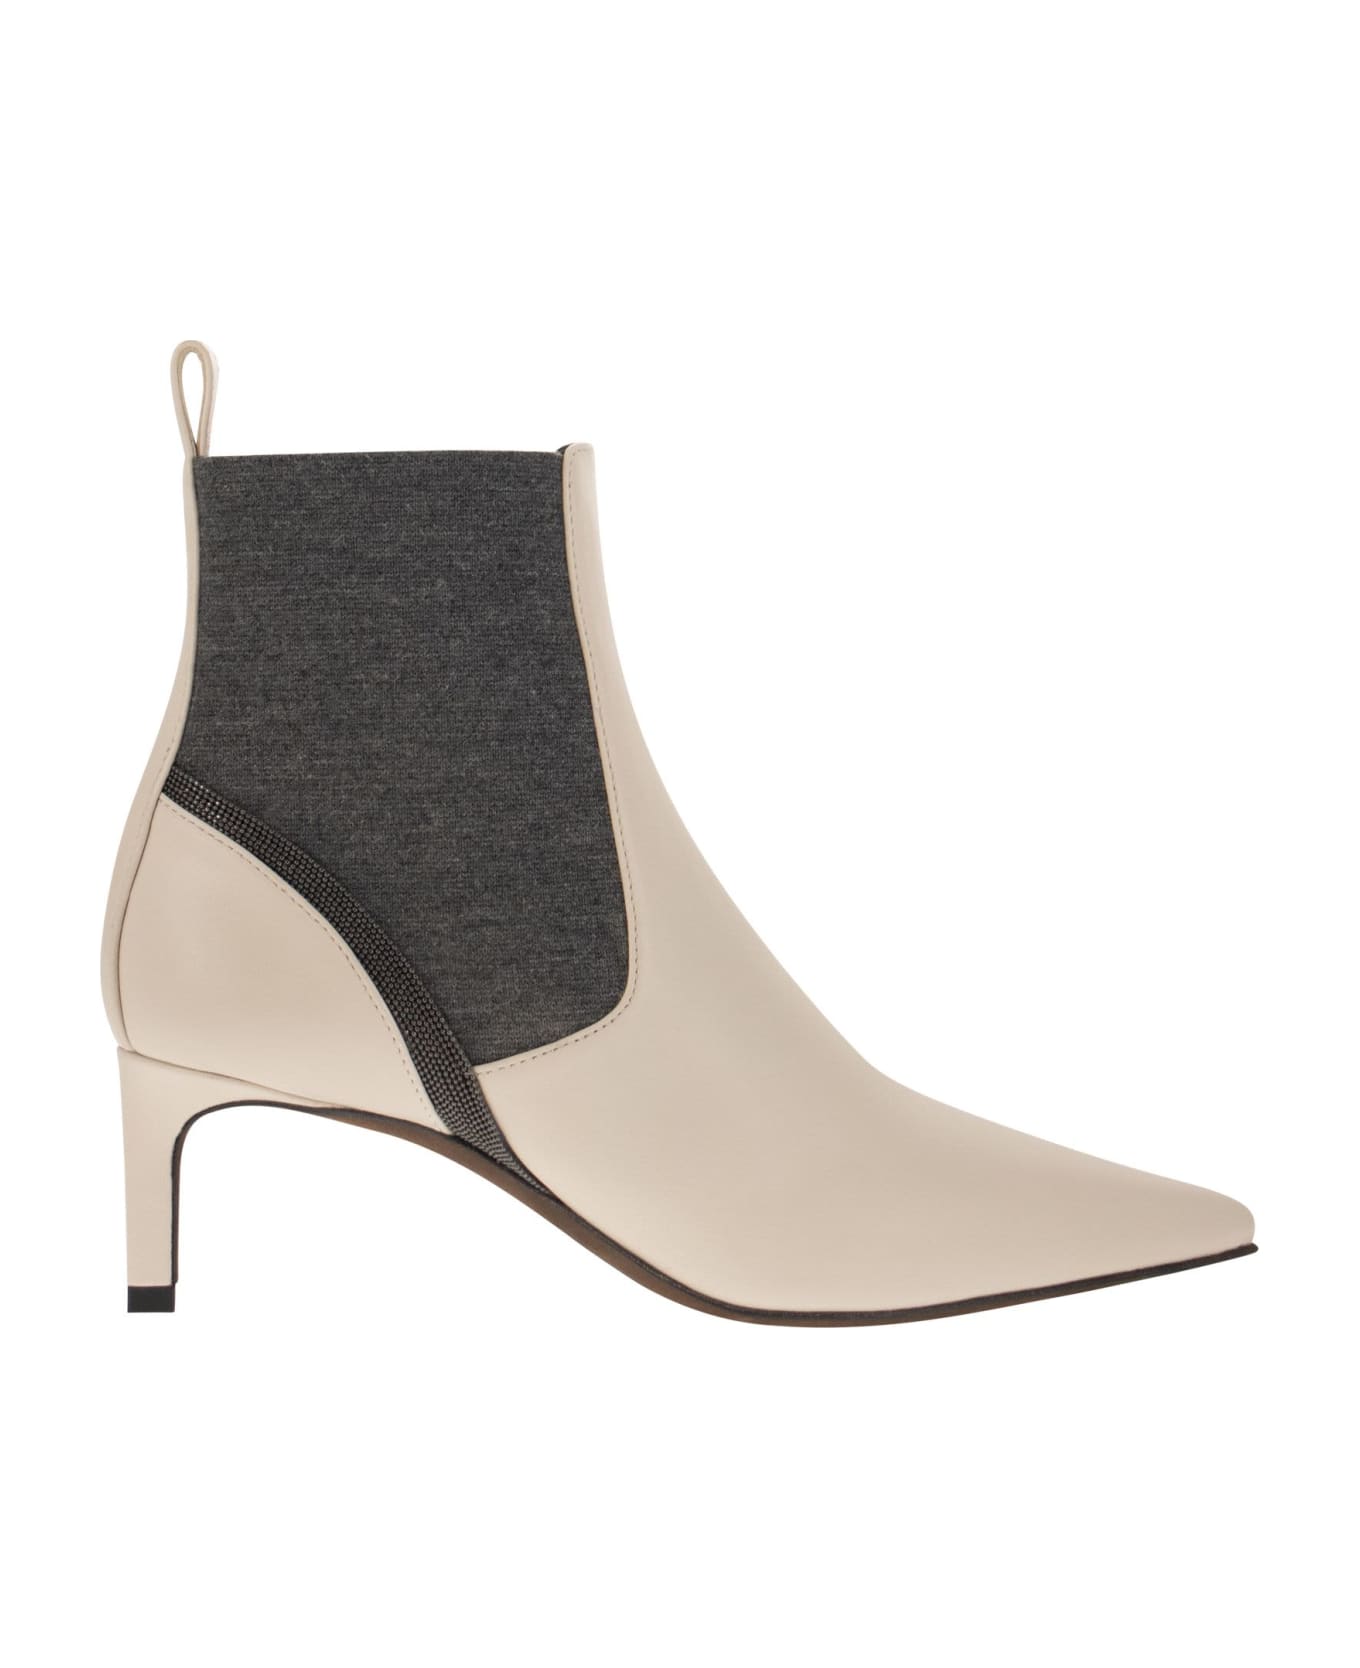 Brunello Cucinelli Leather Heeled Ankle Boots With Shiny Contour - Ivory/grey ブーツ